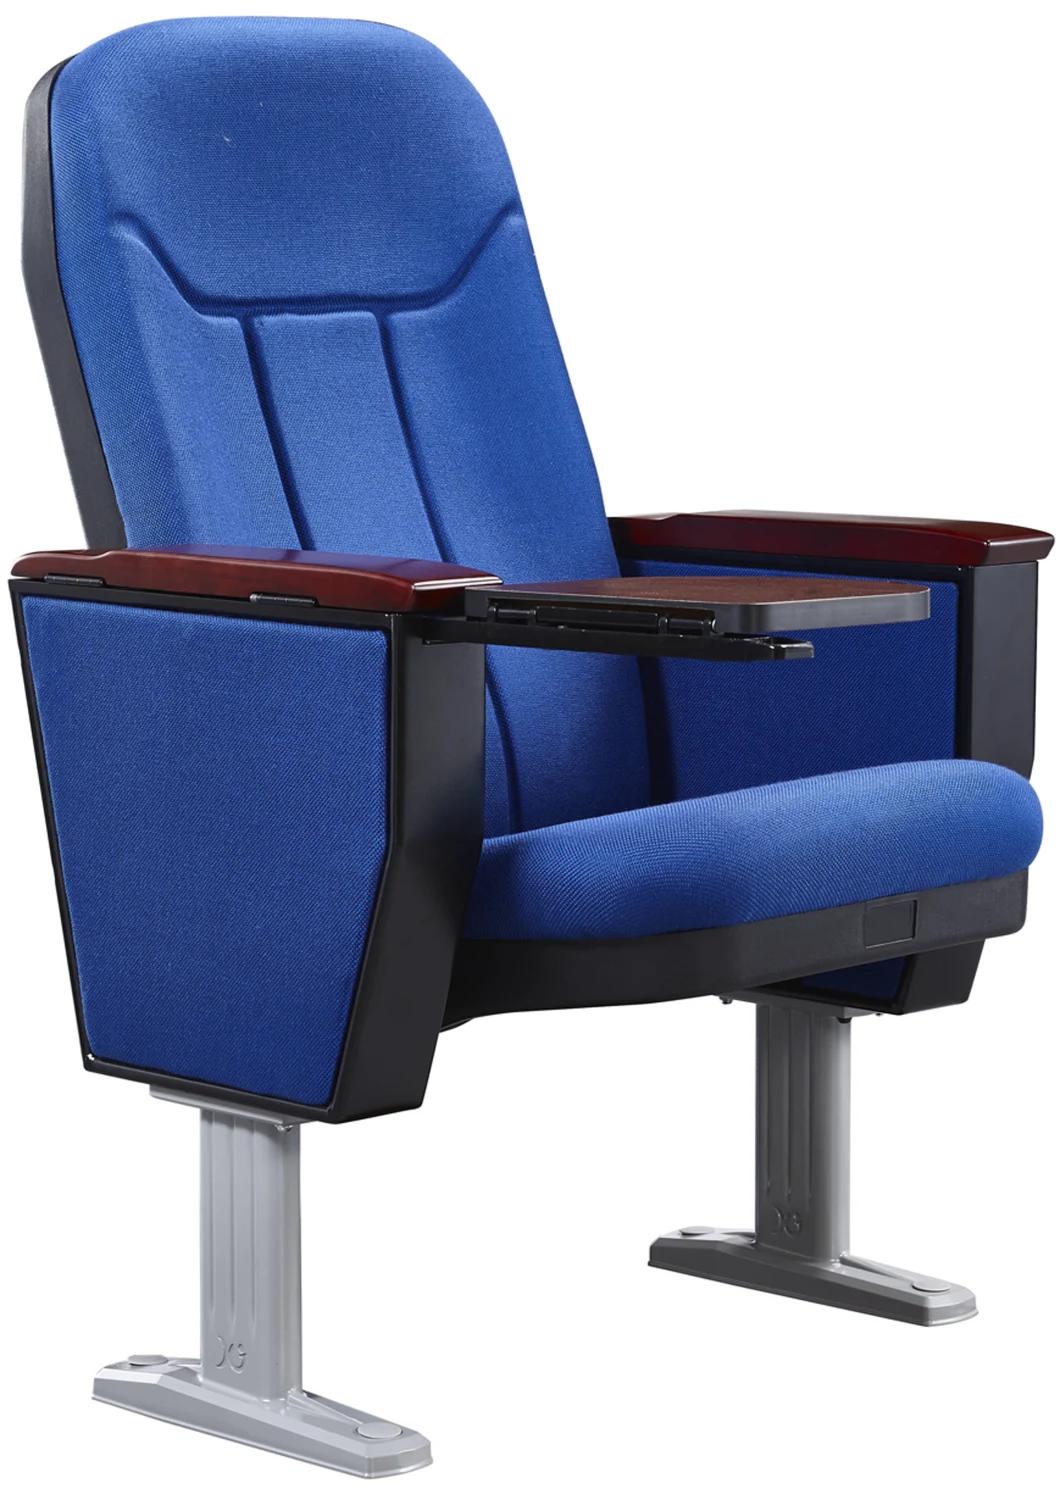 Xiangju Folding Lecture Room Church Chairs Theater Cinema Seat Auditorium Seating Chair Price